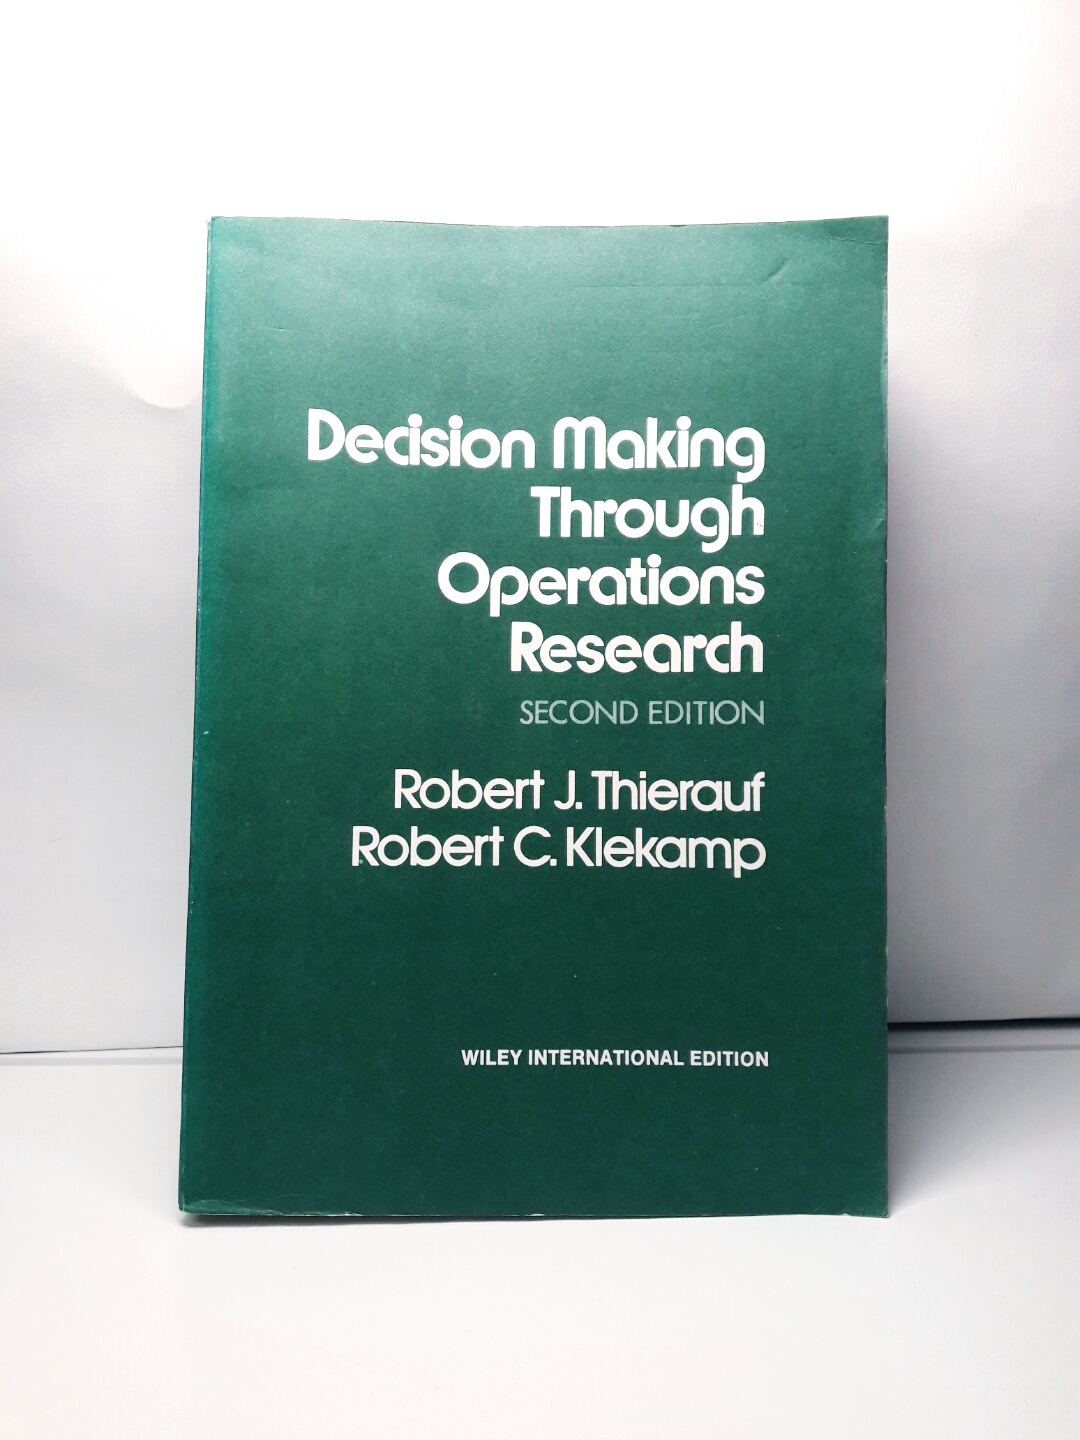 Decision Making Through Operations Research (Wiley series in management and administration)